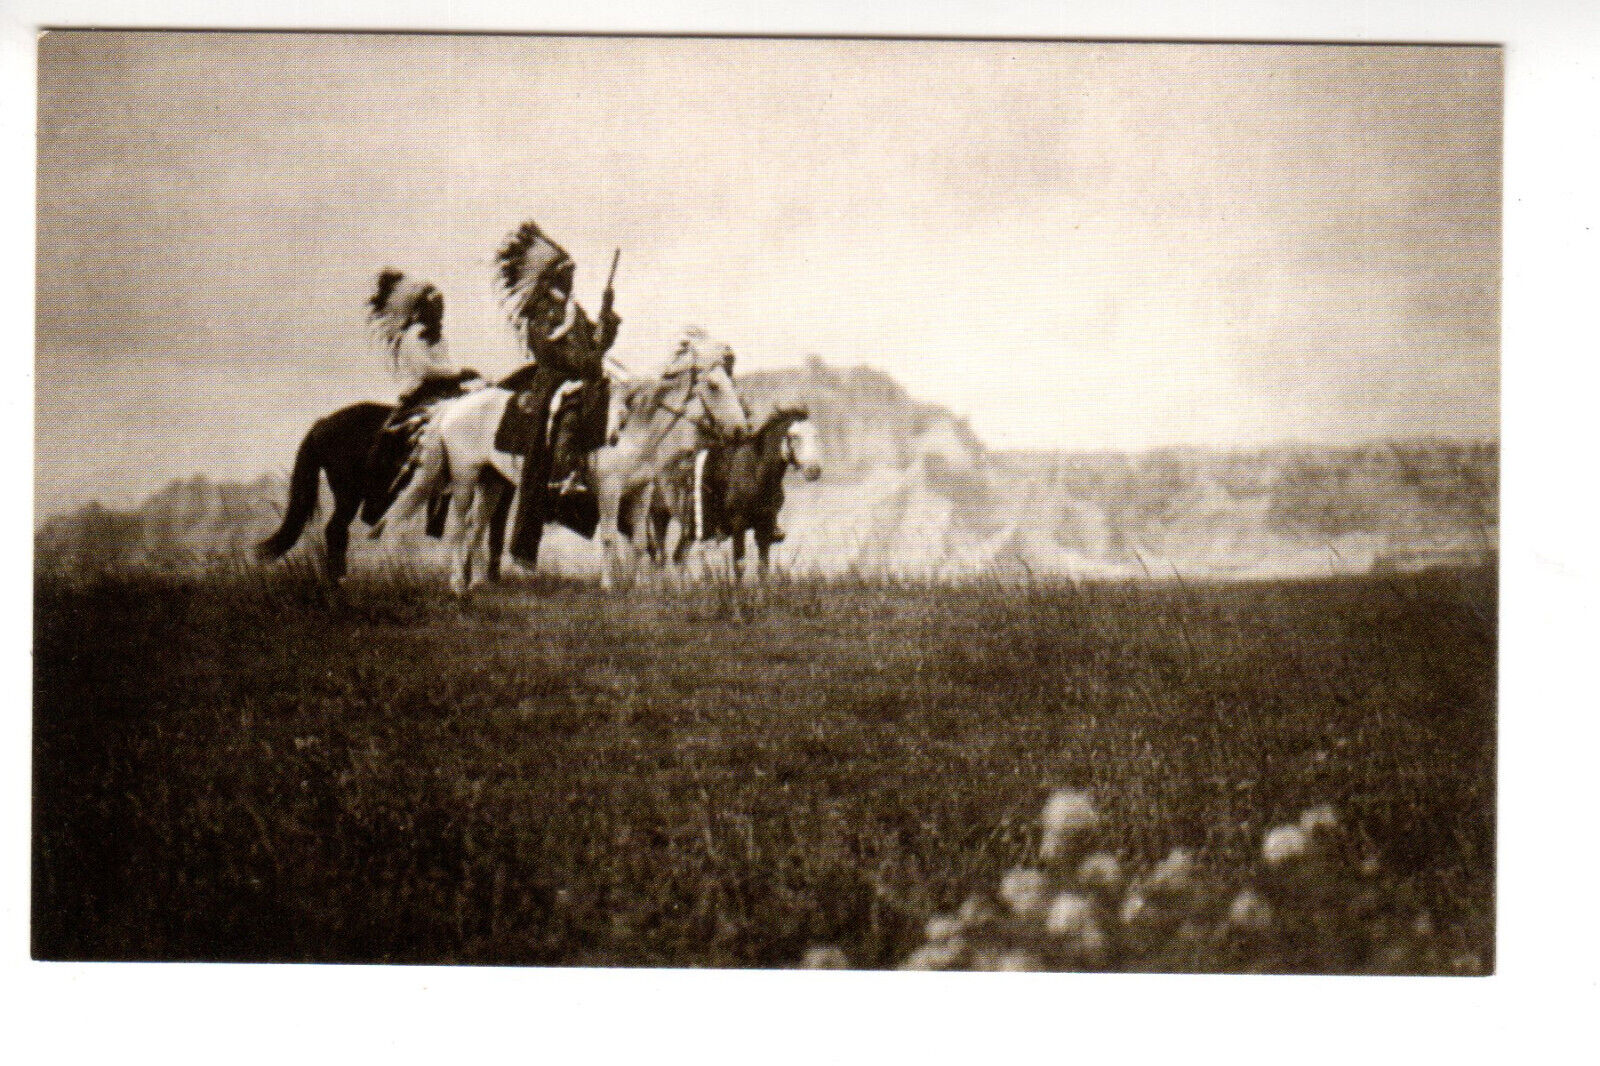 Postcard: Sioux Chiefs on the Plains of the Dakotas, repro of Edward Curtis 1905